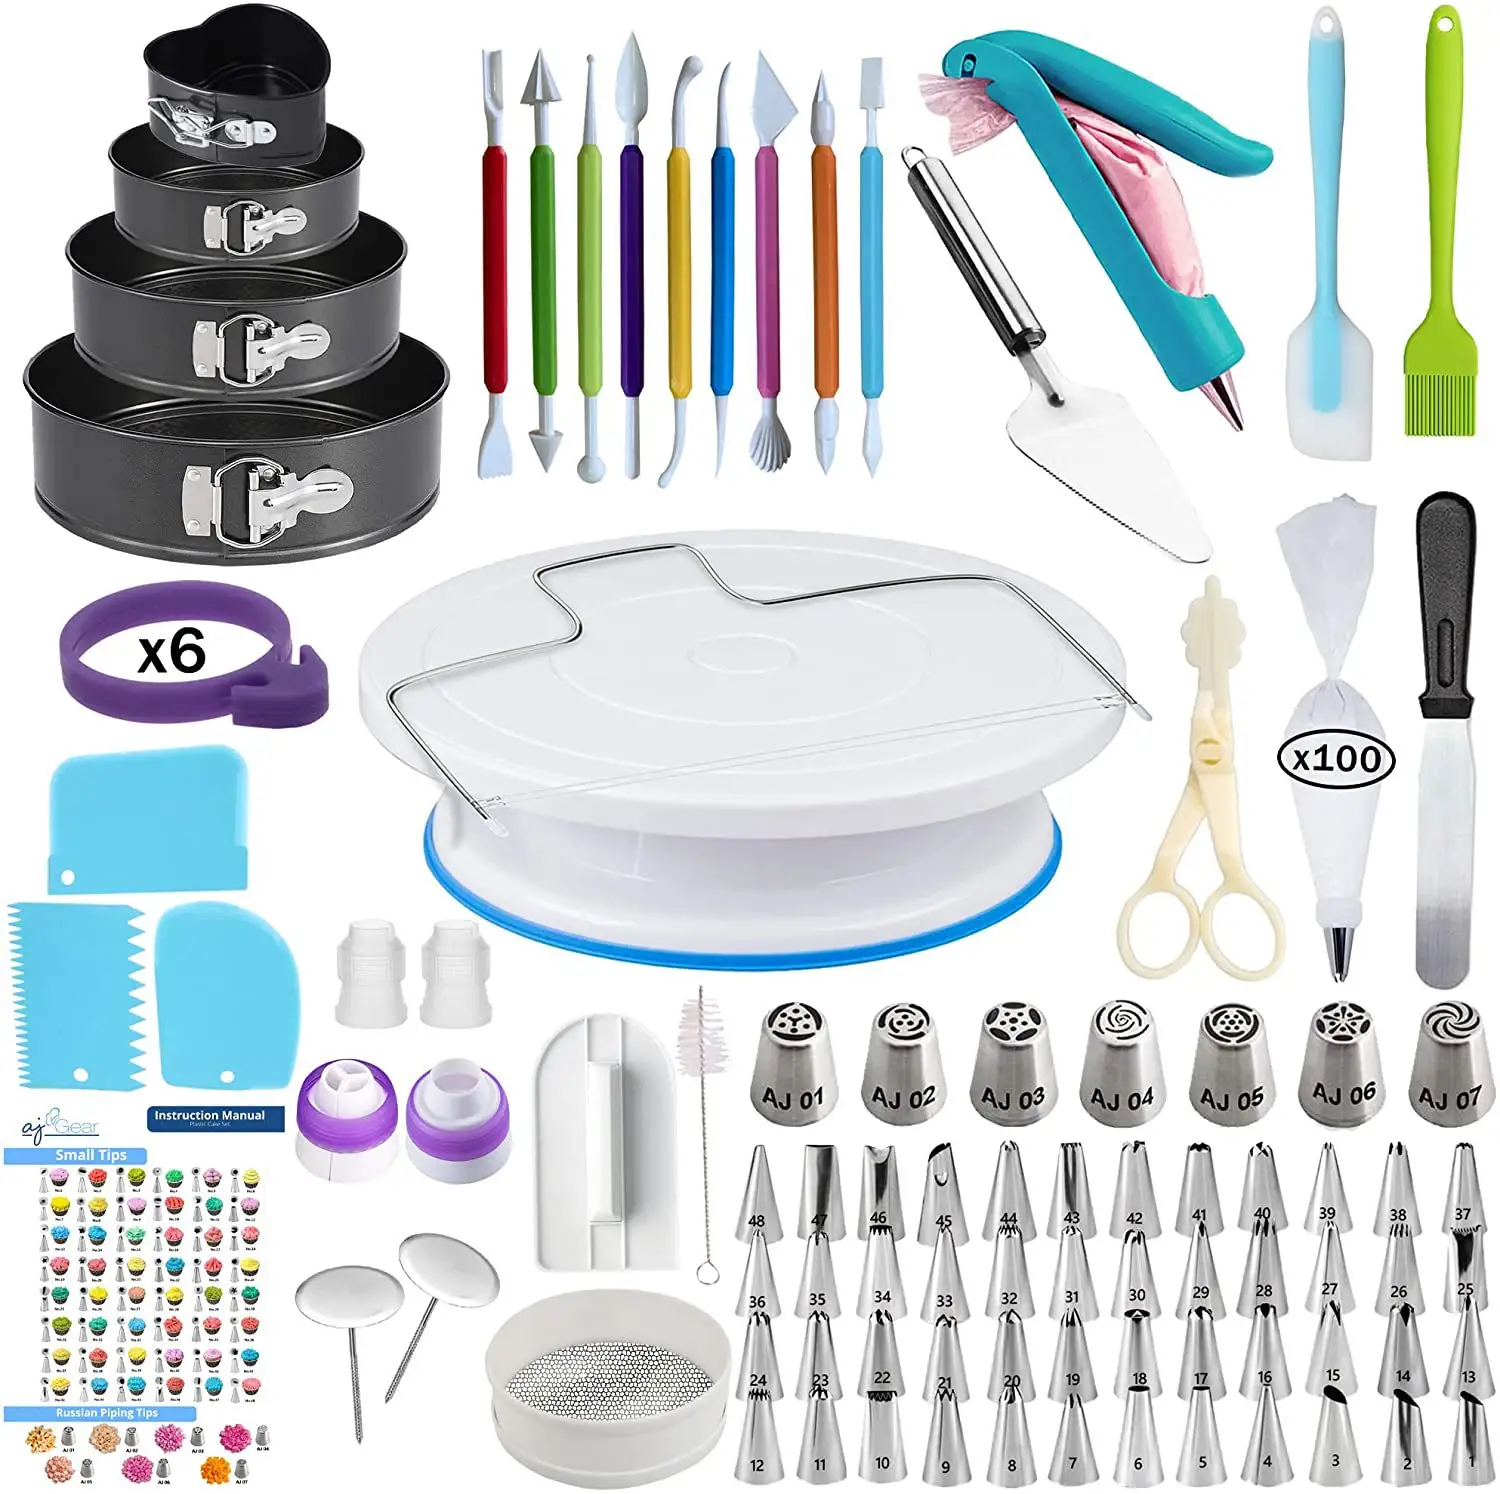 Cake Decorating Supplies Kit Baking and Piping Set of 194PCS Decoration Tools Starter Guide